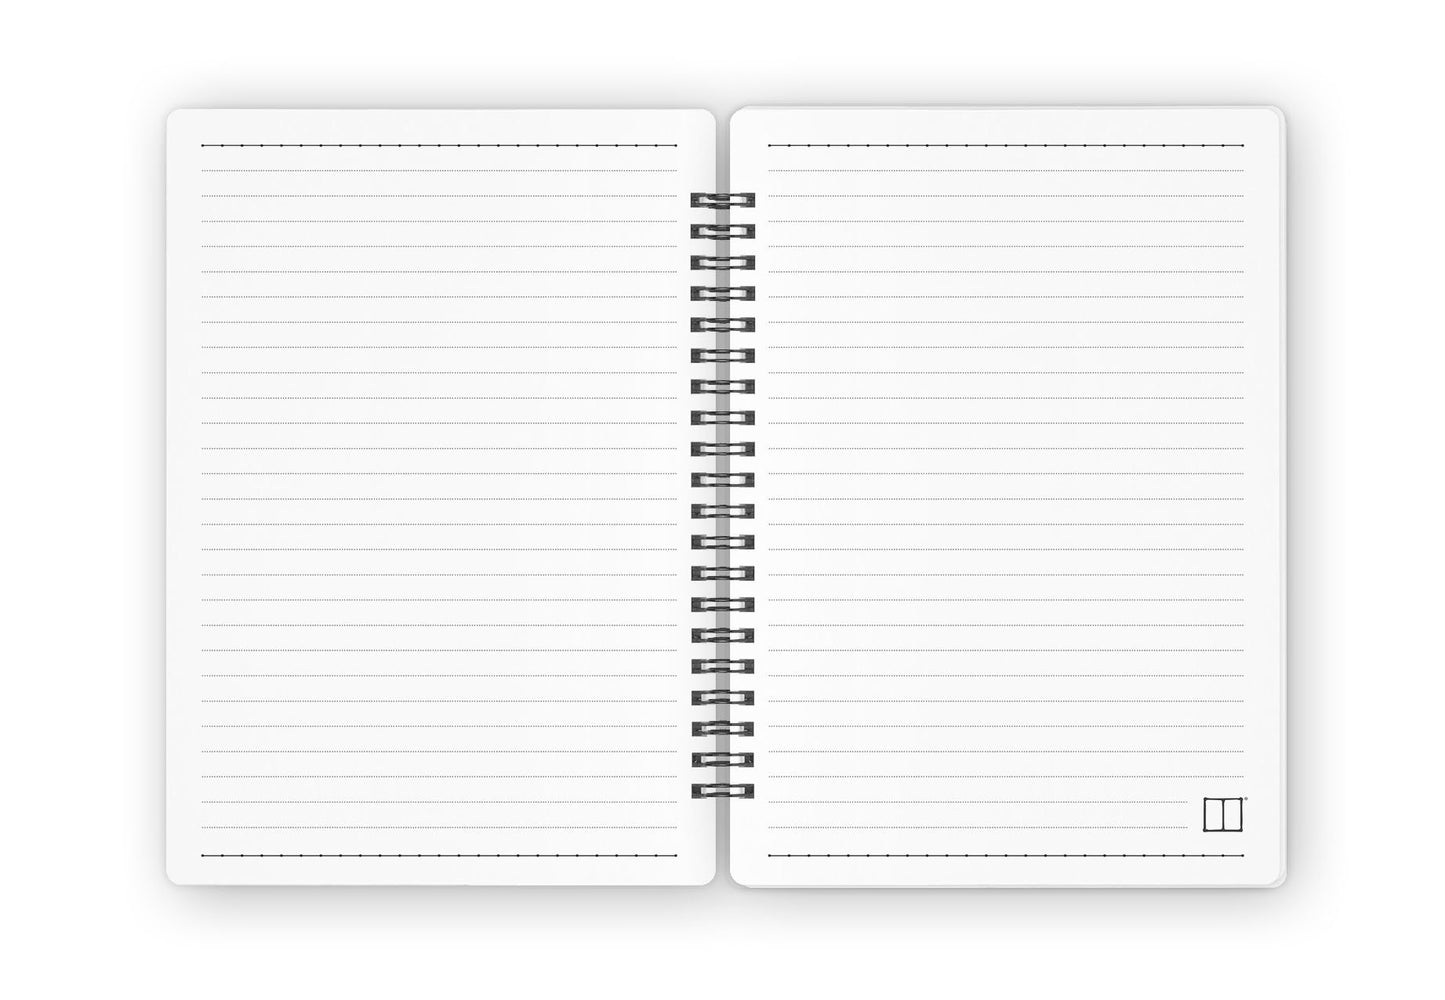 Weekly Planner Notebook | The Journey - (Bundle of 4) - from SketchBook Stationery